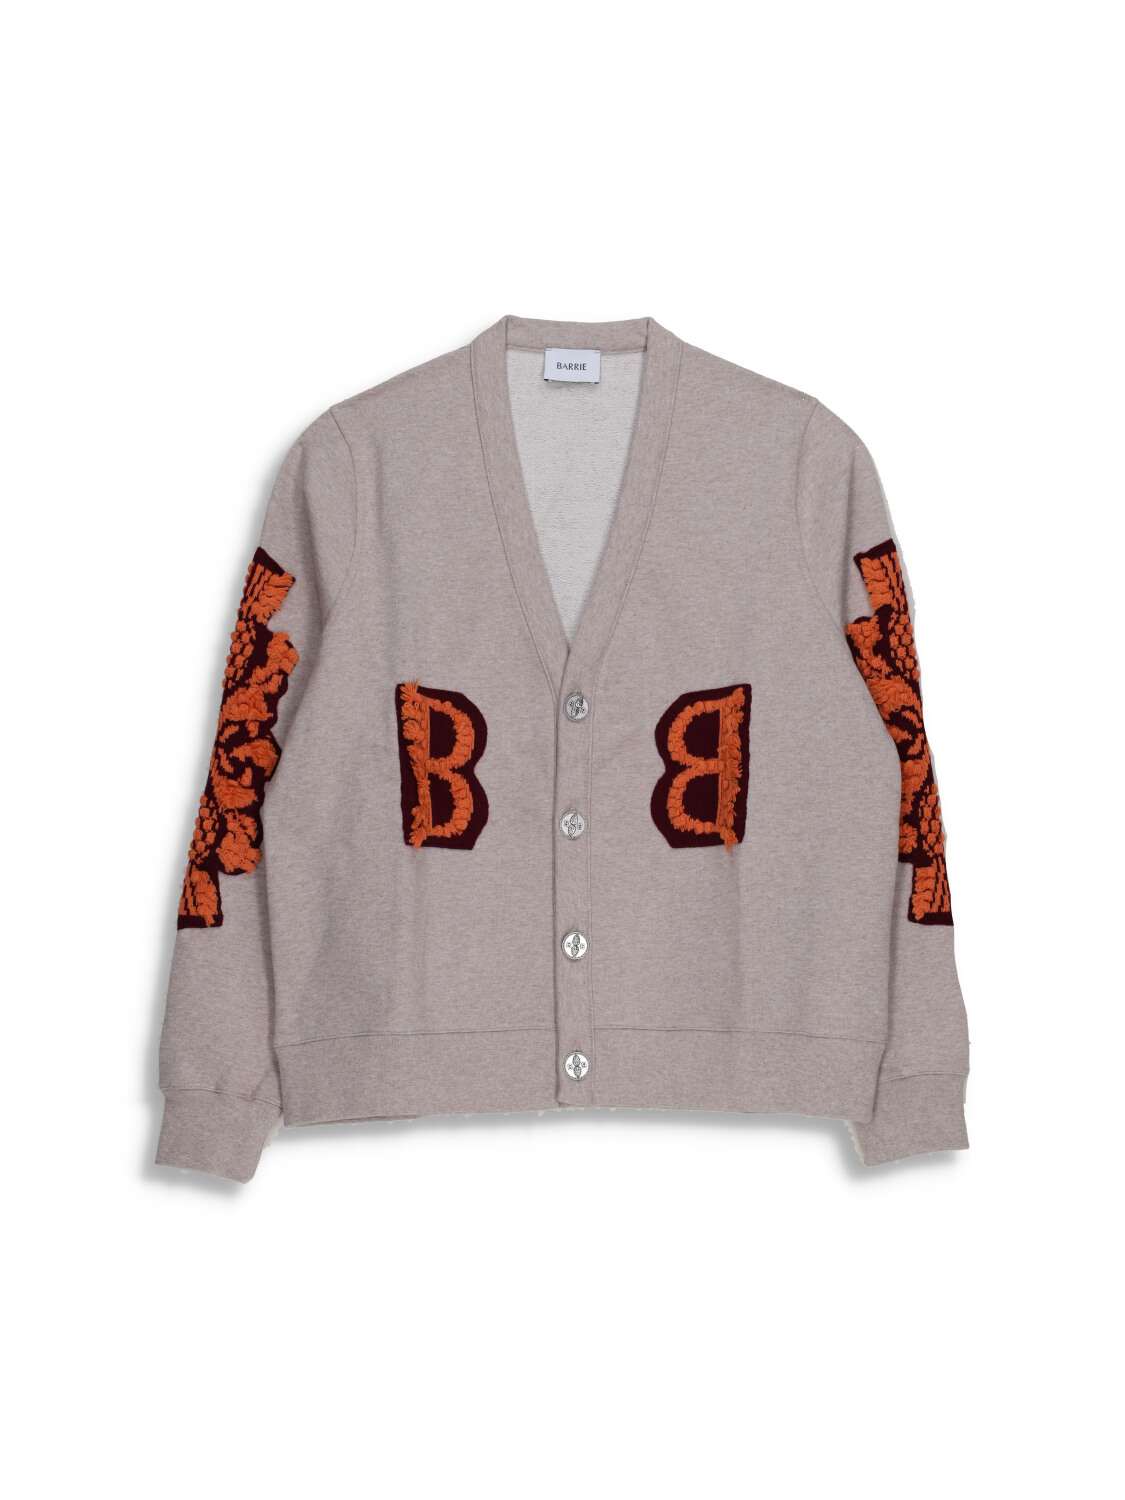 Barrie Barrie - Thistle Logo Cardigan Beige avec applications oranges rot S